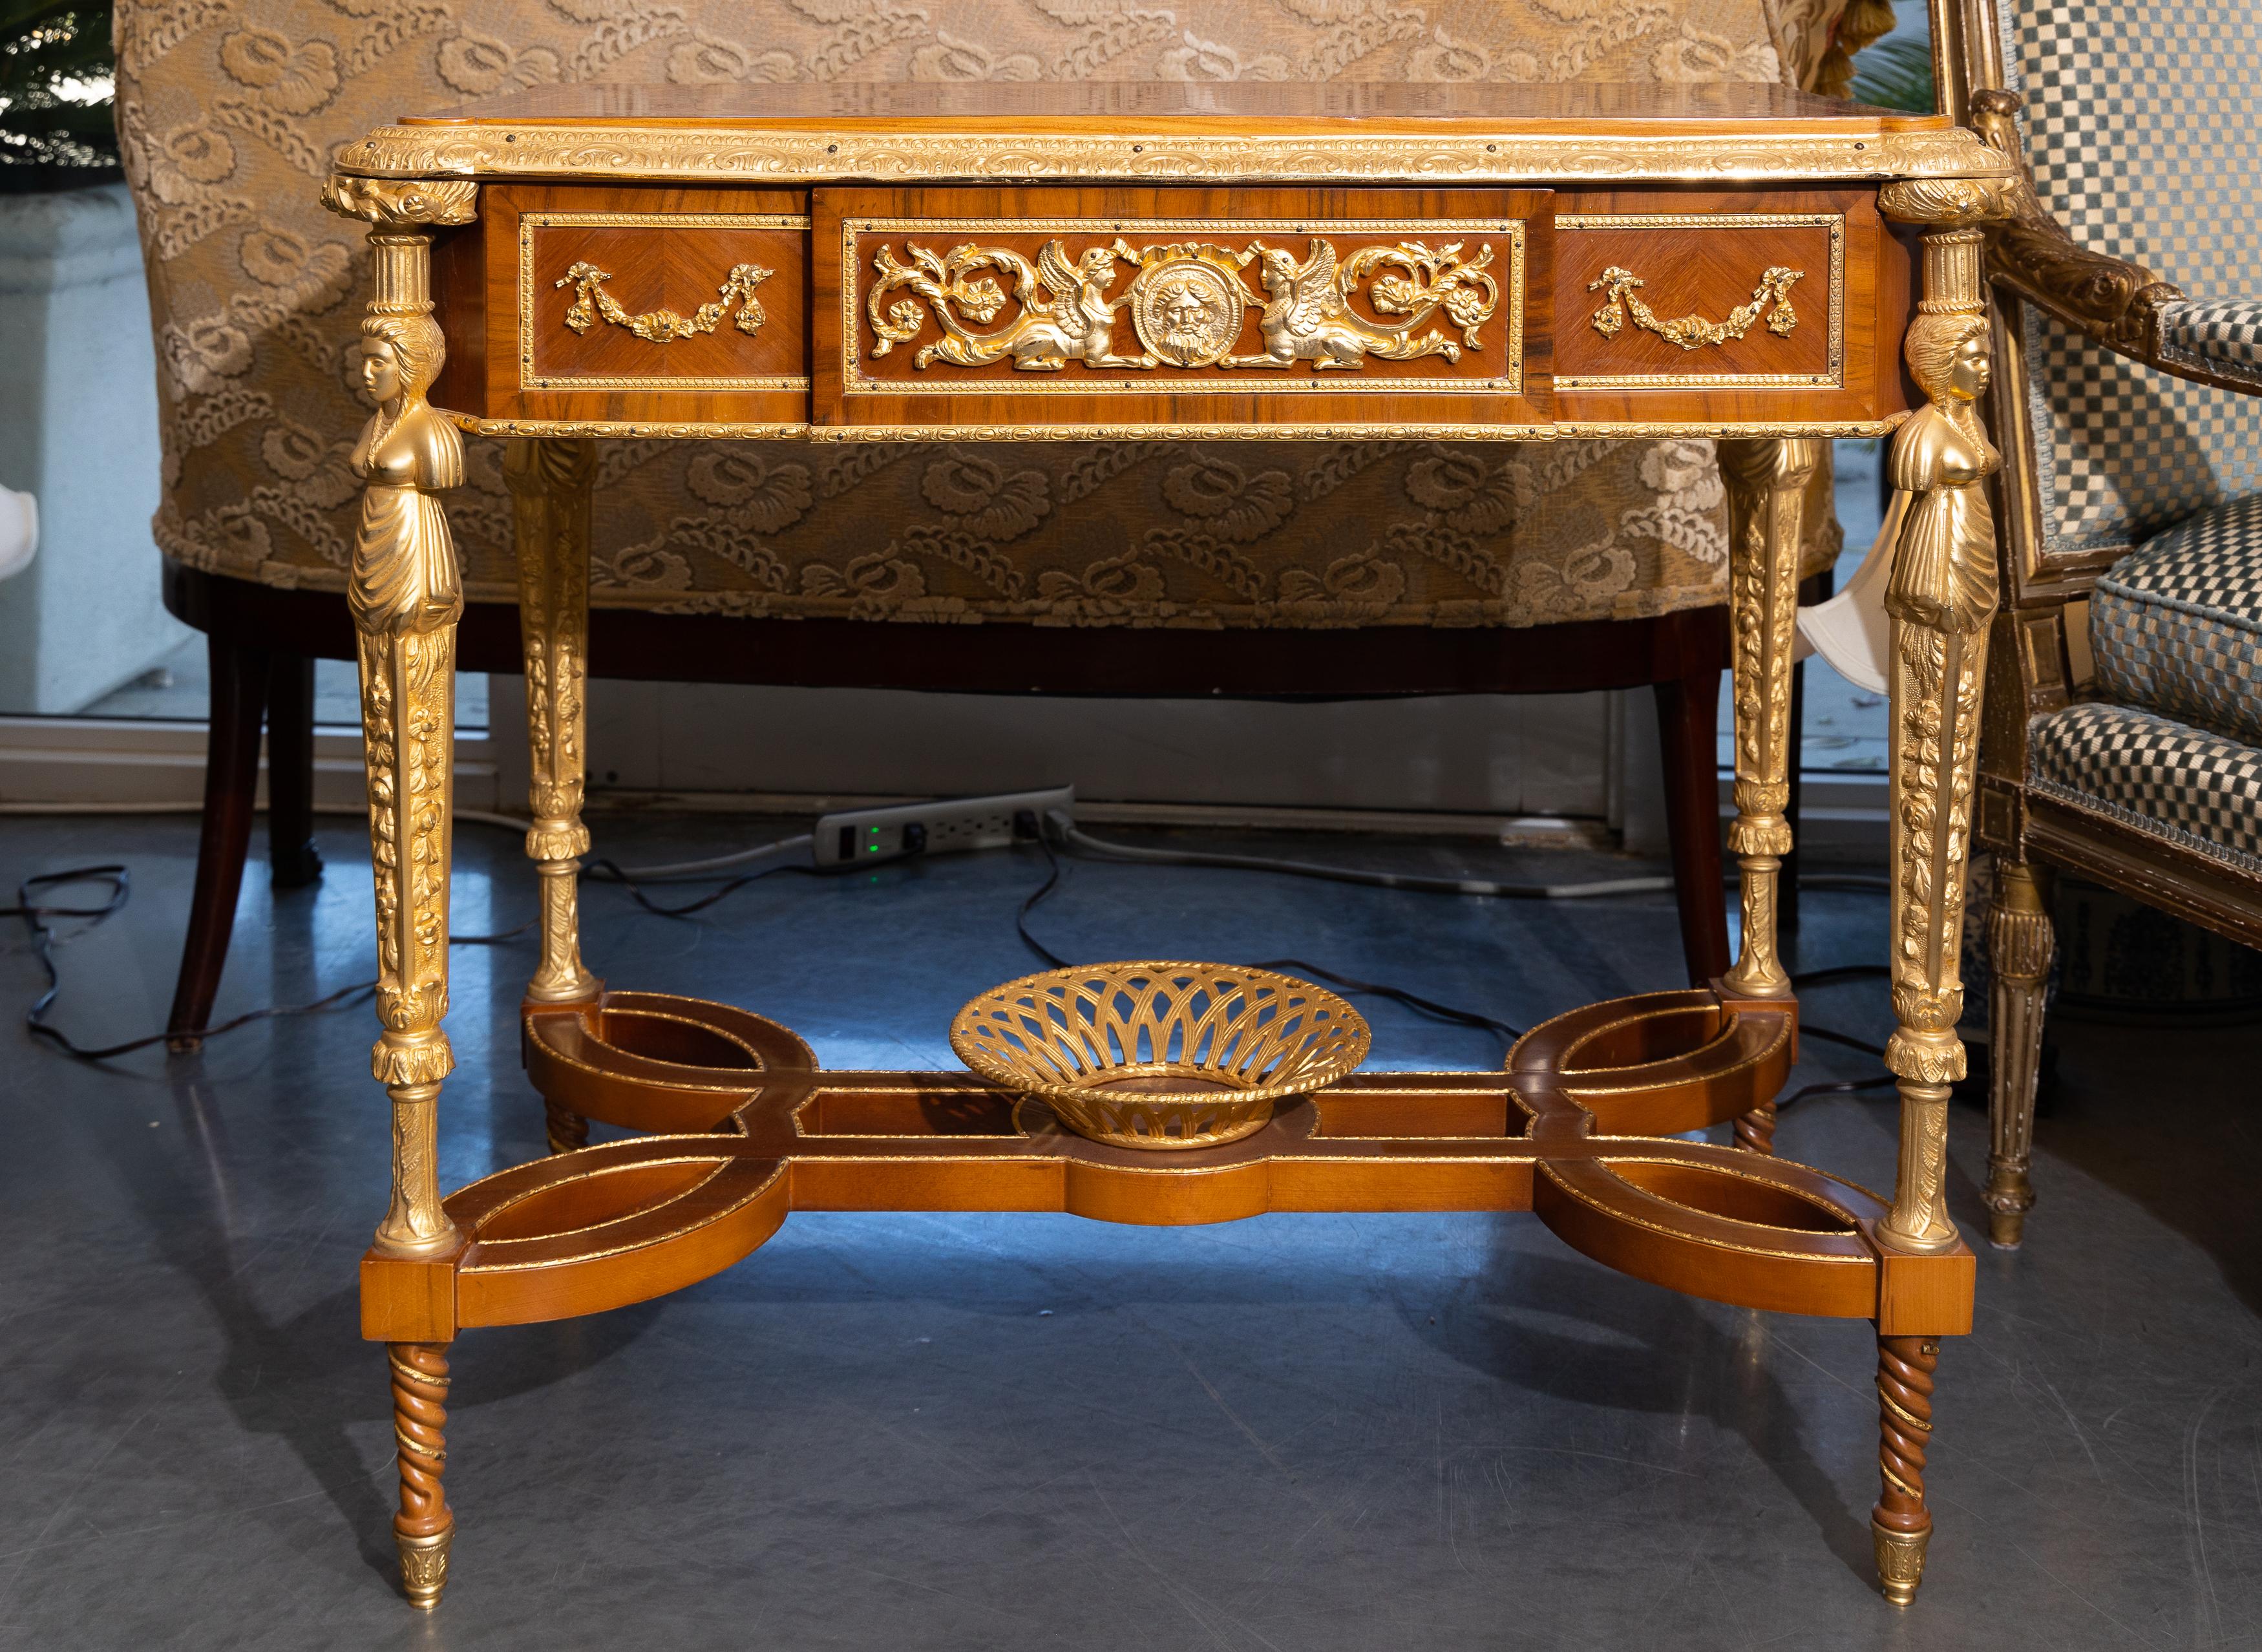 This is a nicely inlaid gilt bronze marquetry table after the model of Adam Weisweller. Wonderful proportions and offers a multitude of uses from a sofa table, center table of writing desk. High style and sophisticated.